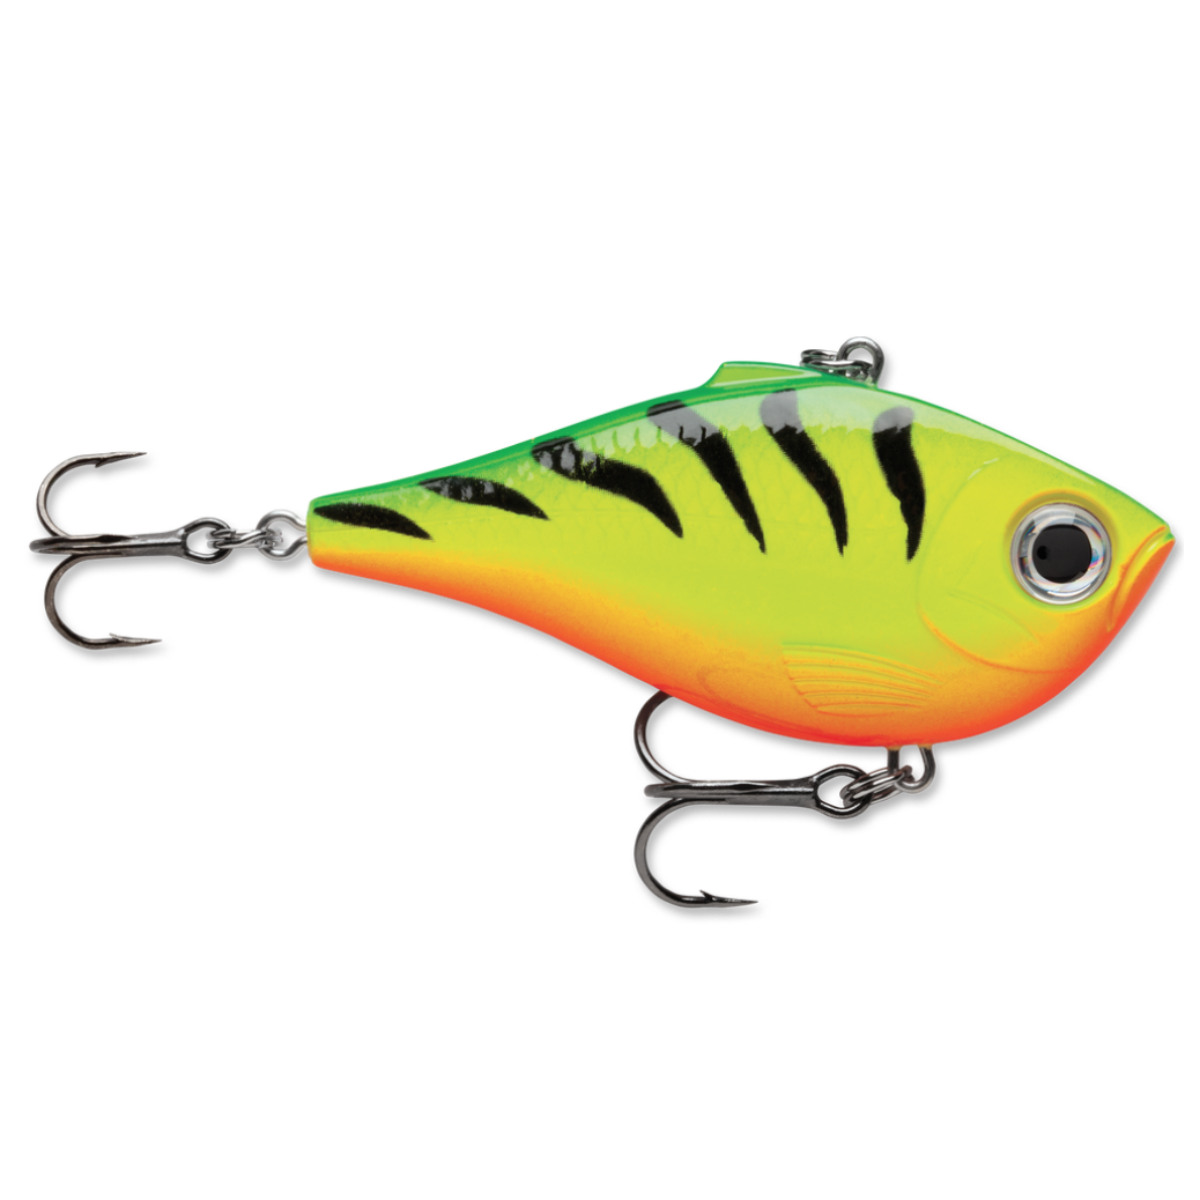 Rapala Rippin' Rap RPR-6 – Wind Rose North Ltd. Outfitters